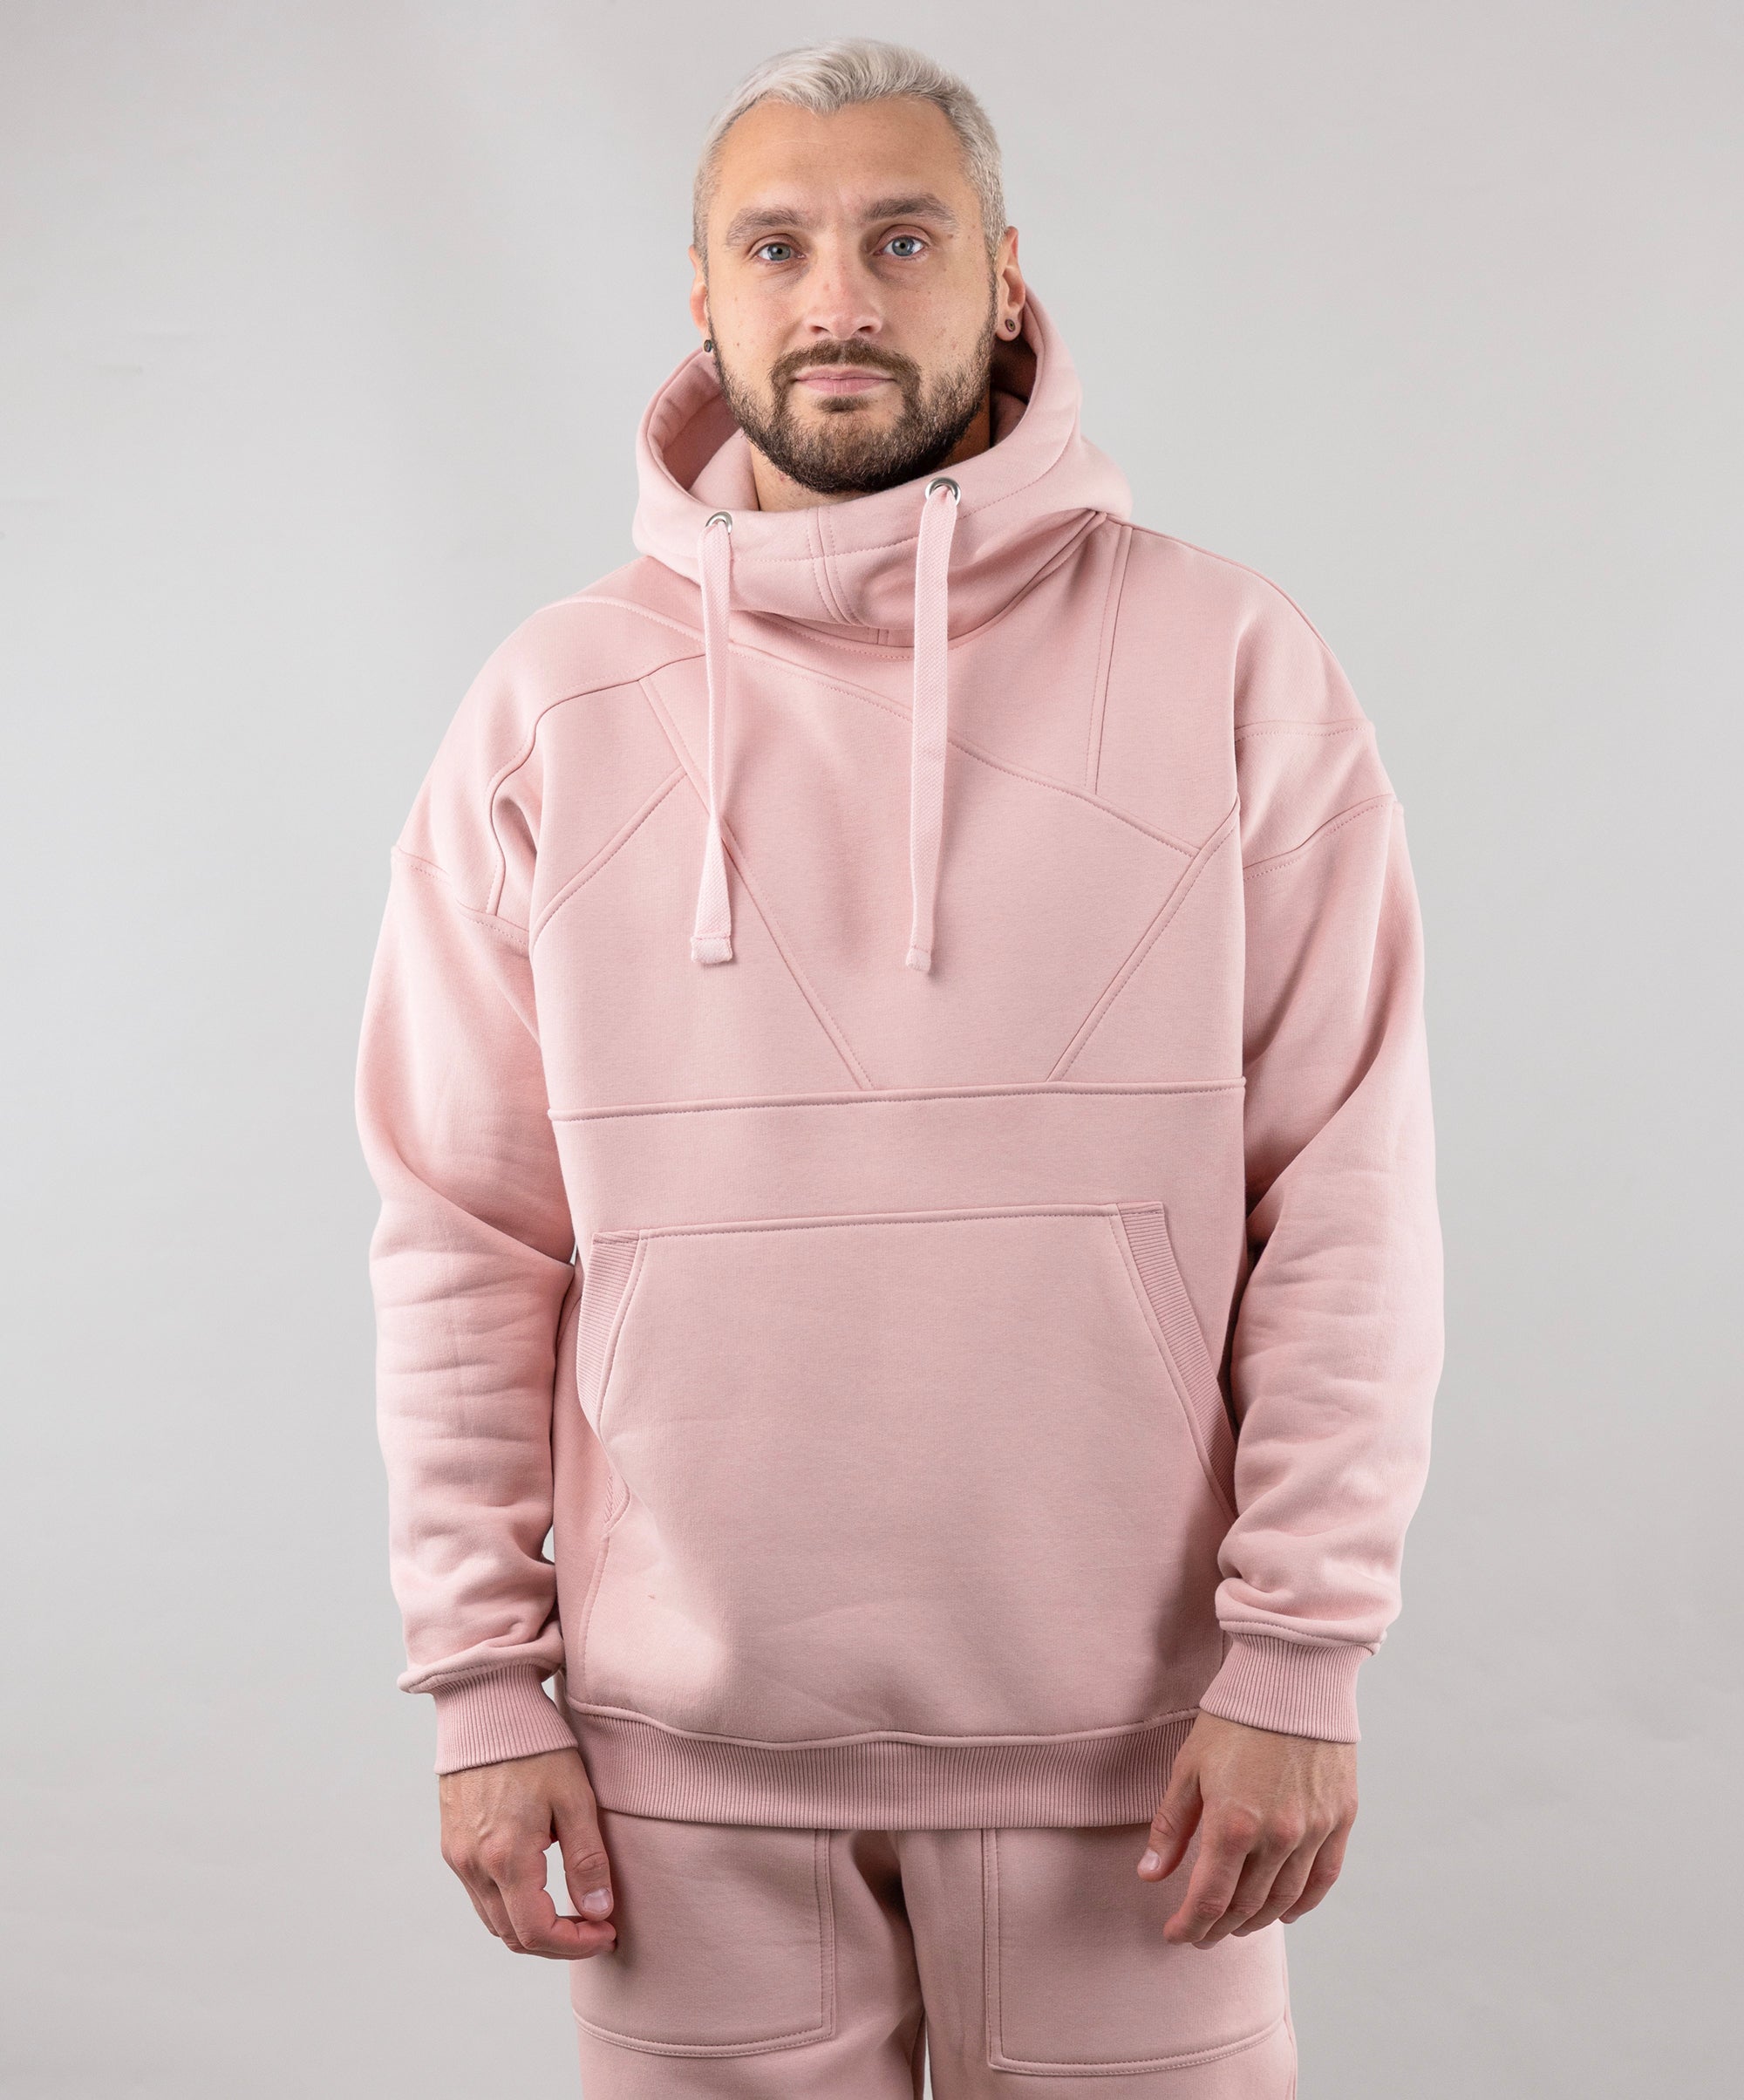 Warm Oversize Hoodie "Introvert". Pink. On the Man. In front